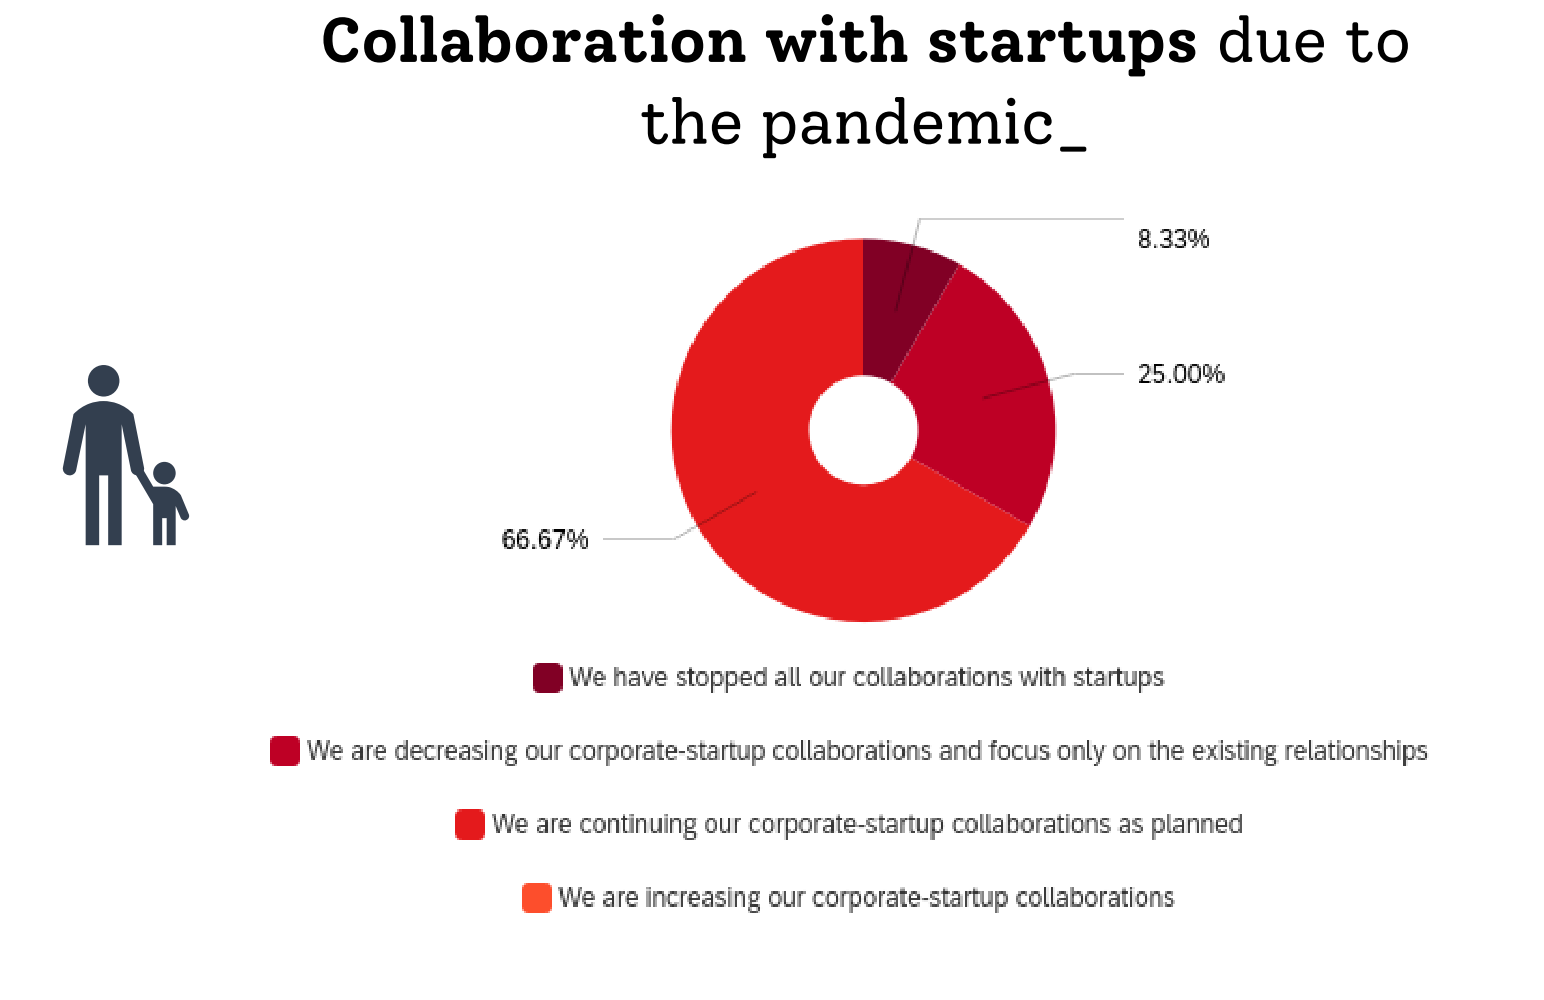 Chart showing the effect of the pandemic on startup collaboration 